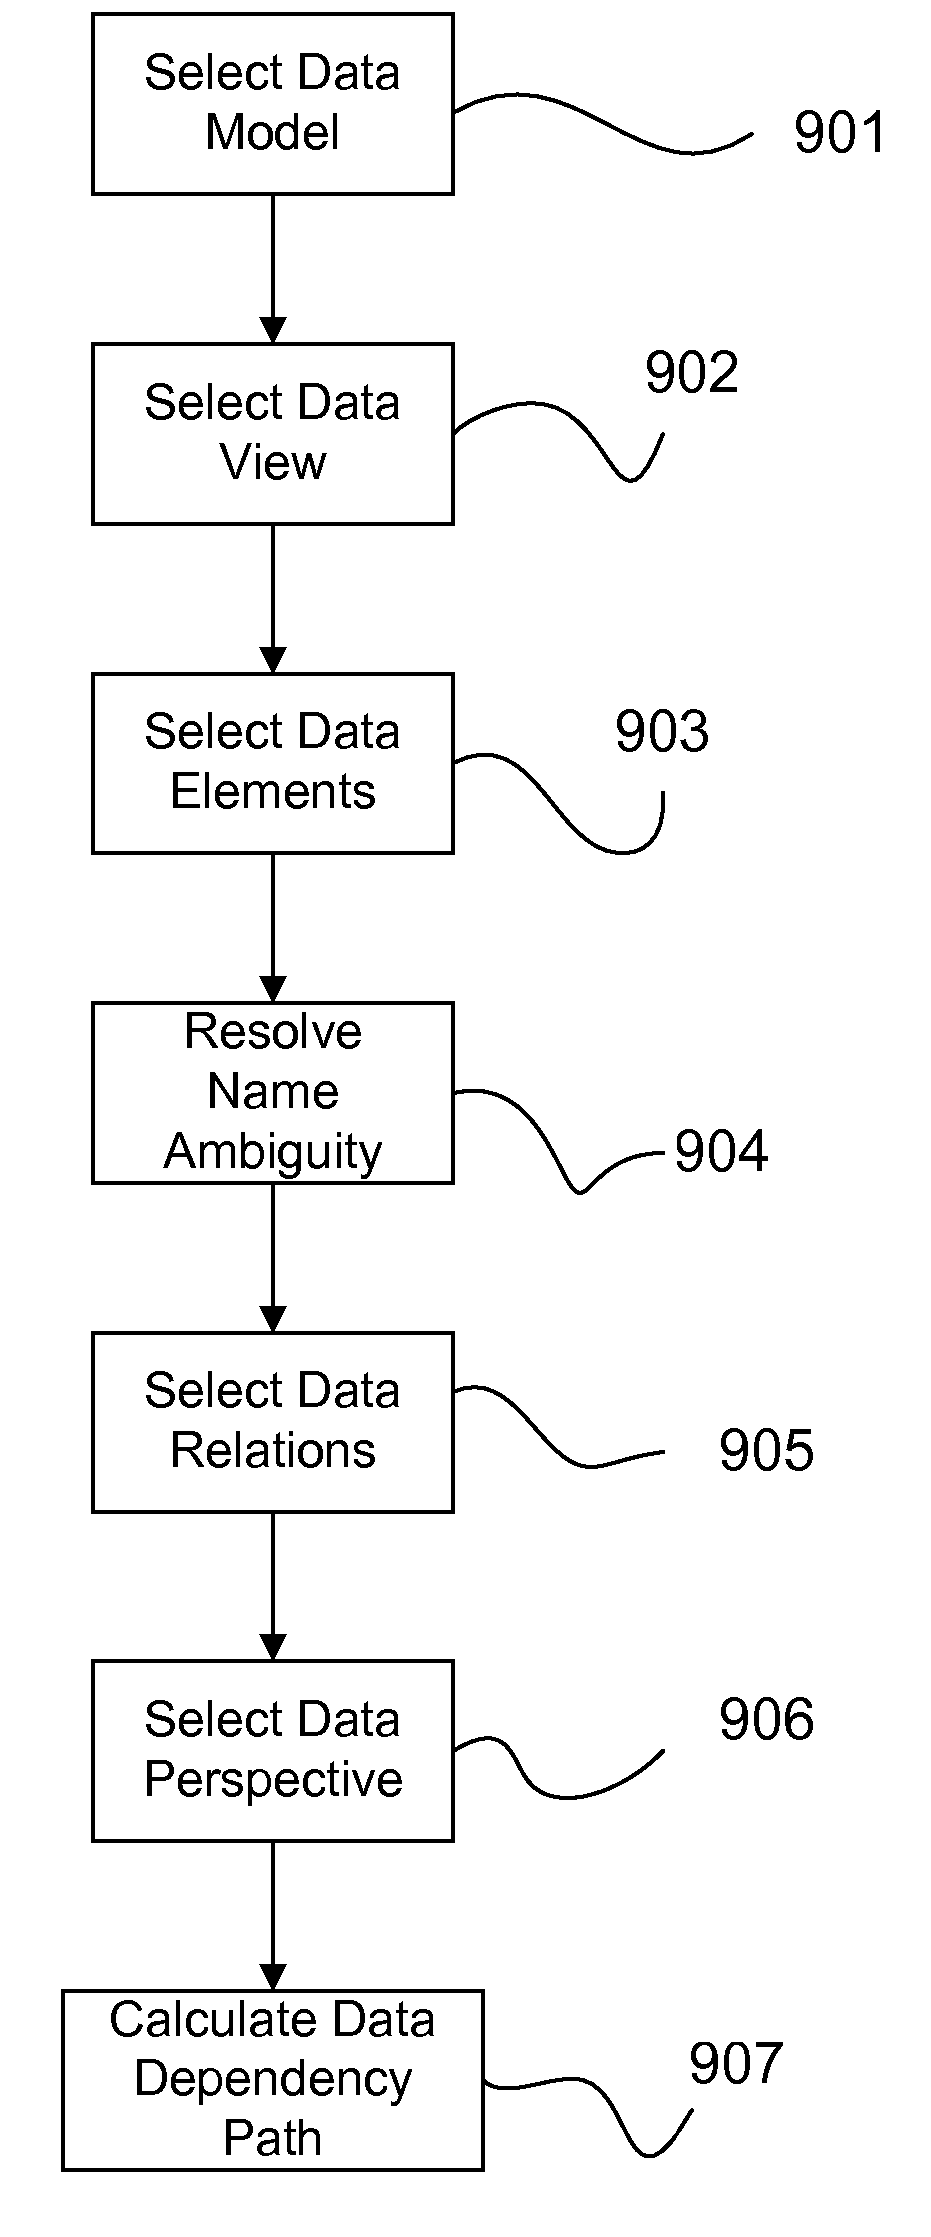 Rapid application development based on a data dependency path through a body of related data